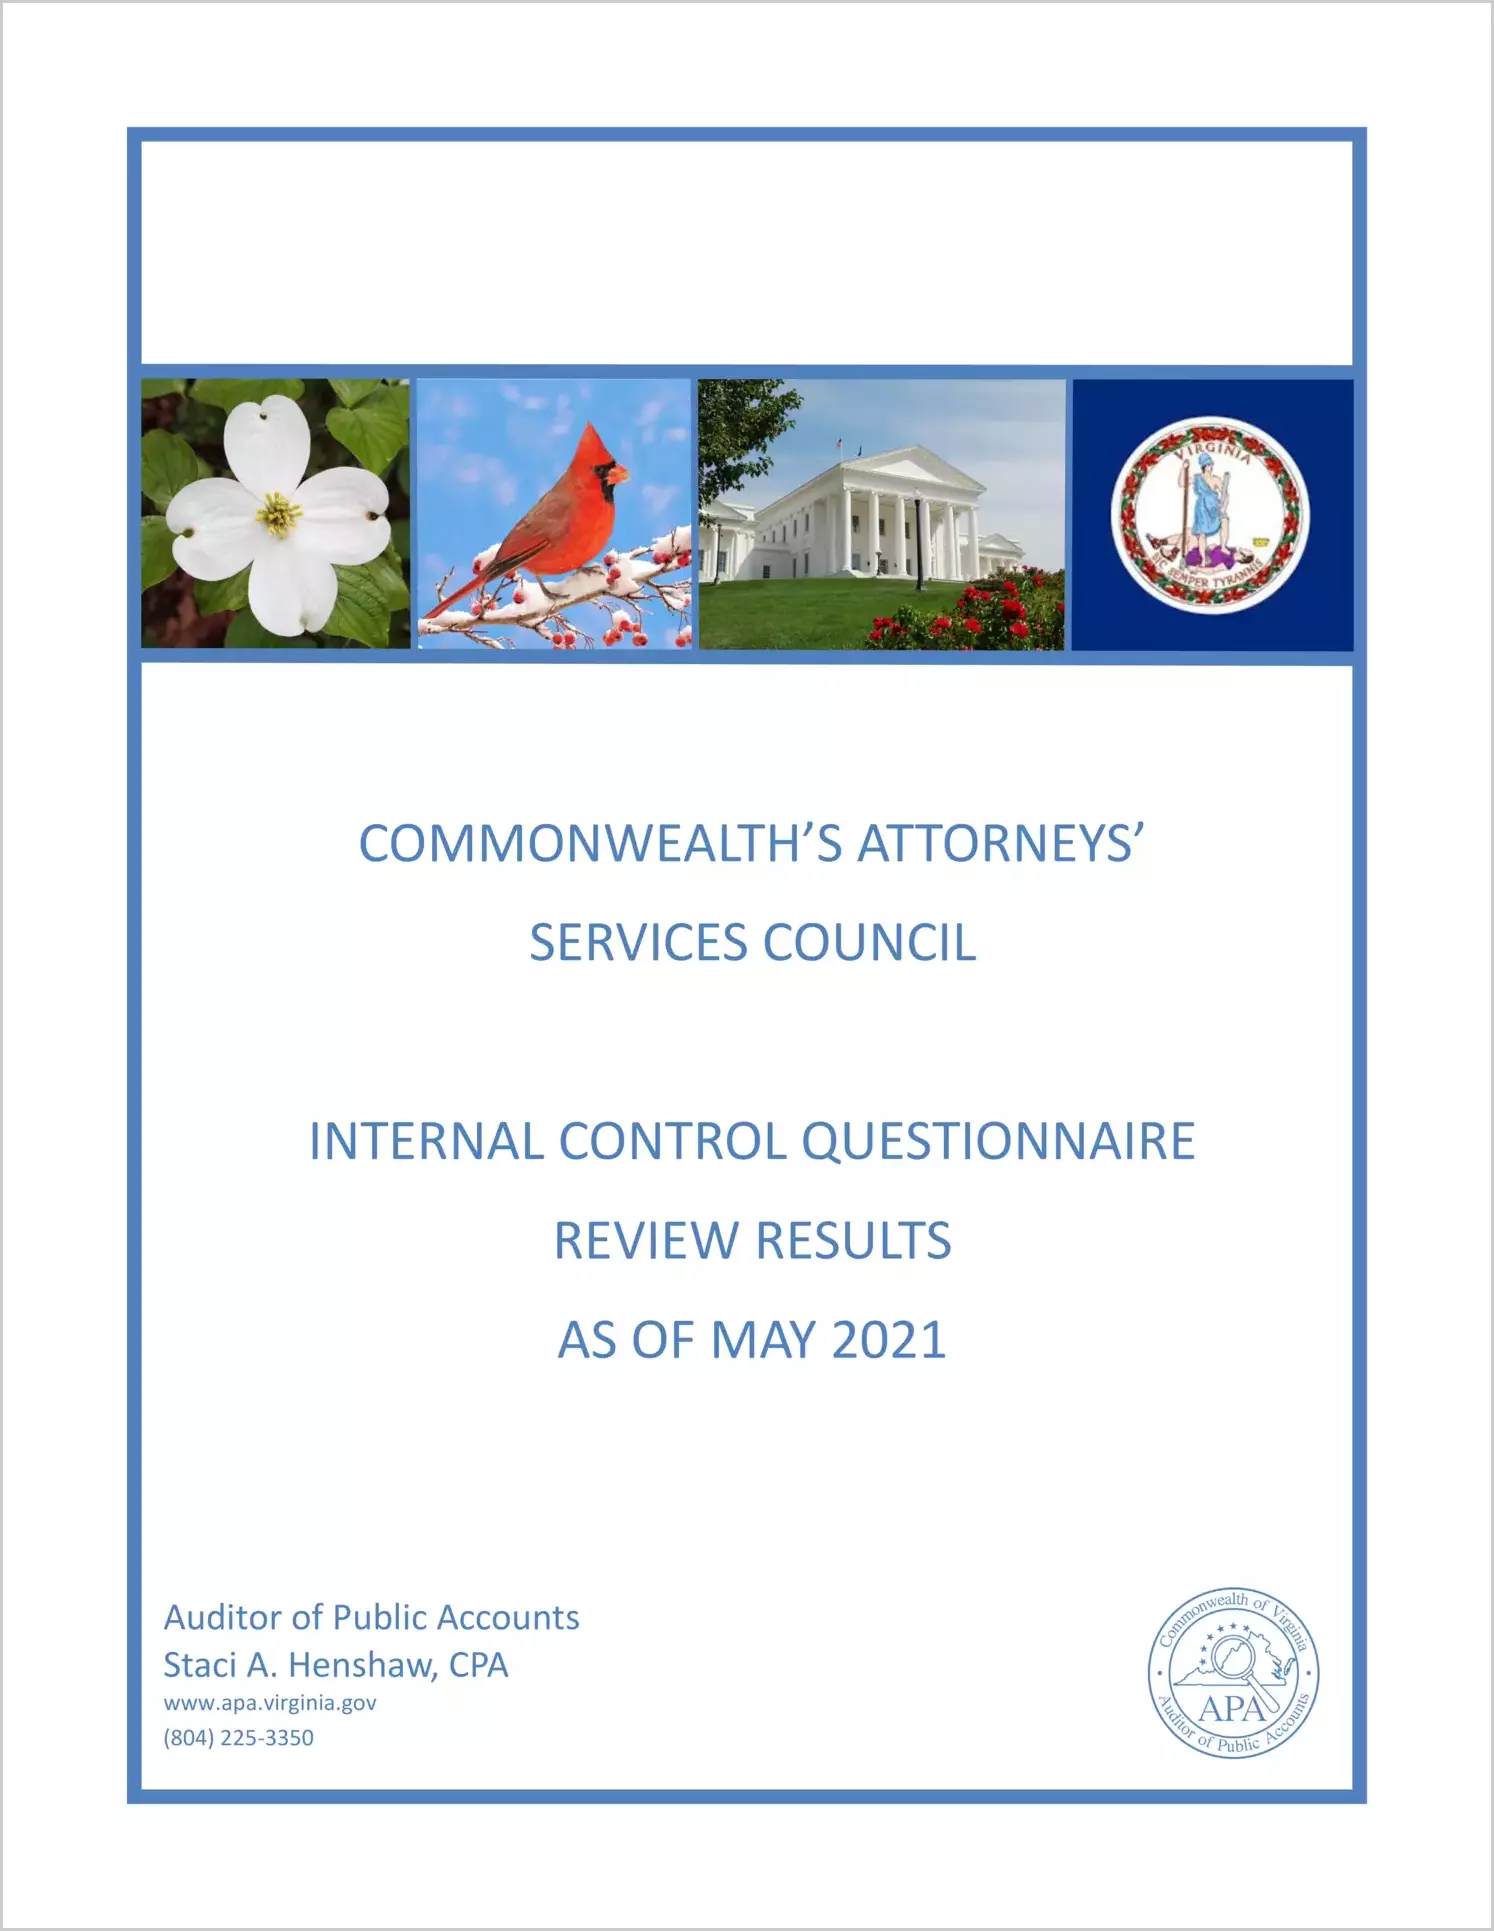 Commonwealth's Attorney's Services Council Internal Control Questionnaire Review Results as of May 2021